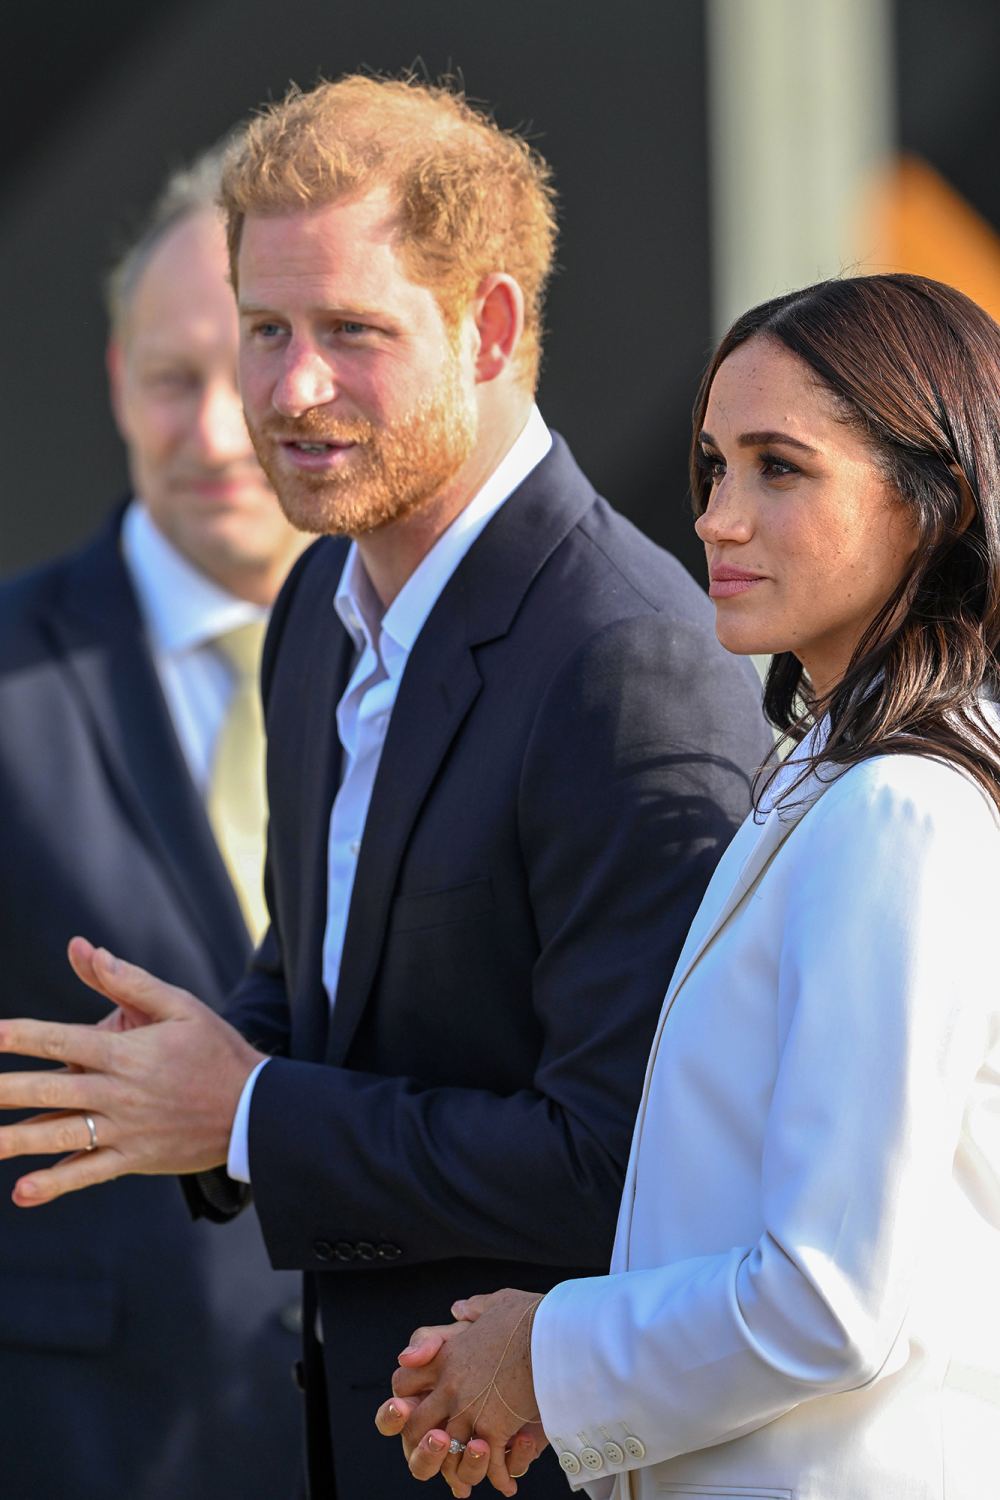 Meghan Markle and Prince Harry Make Stylish Appearance at the Invictus Games